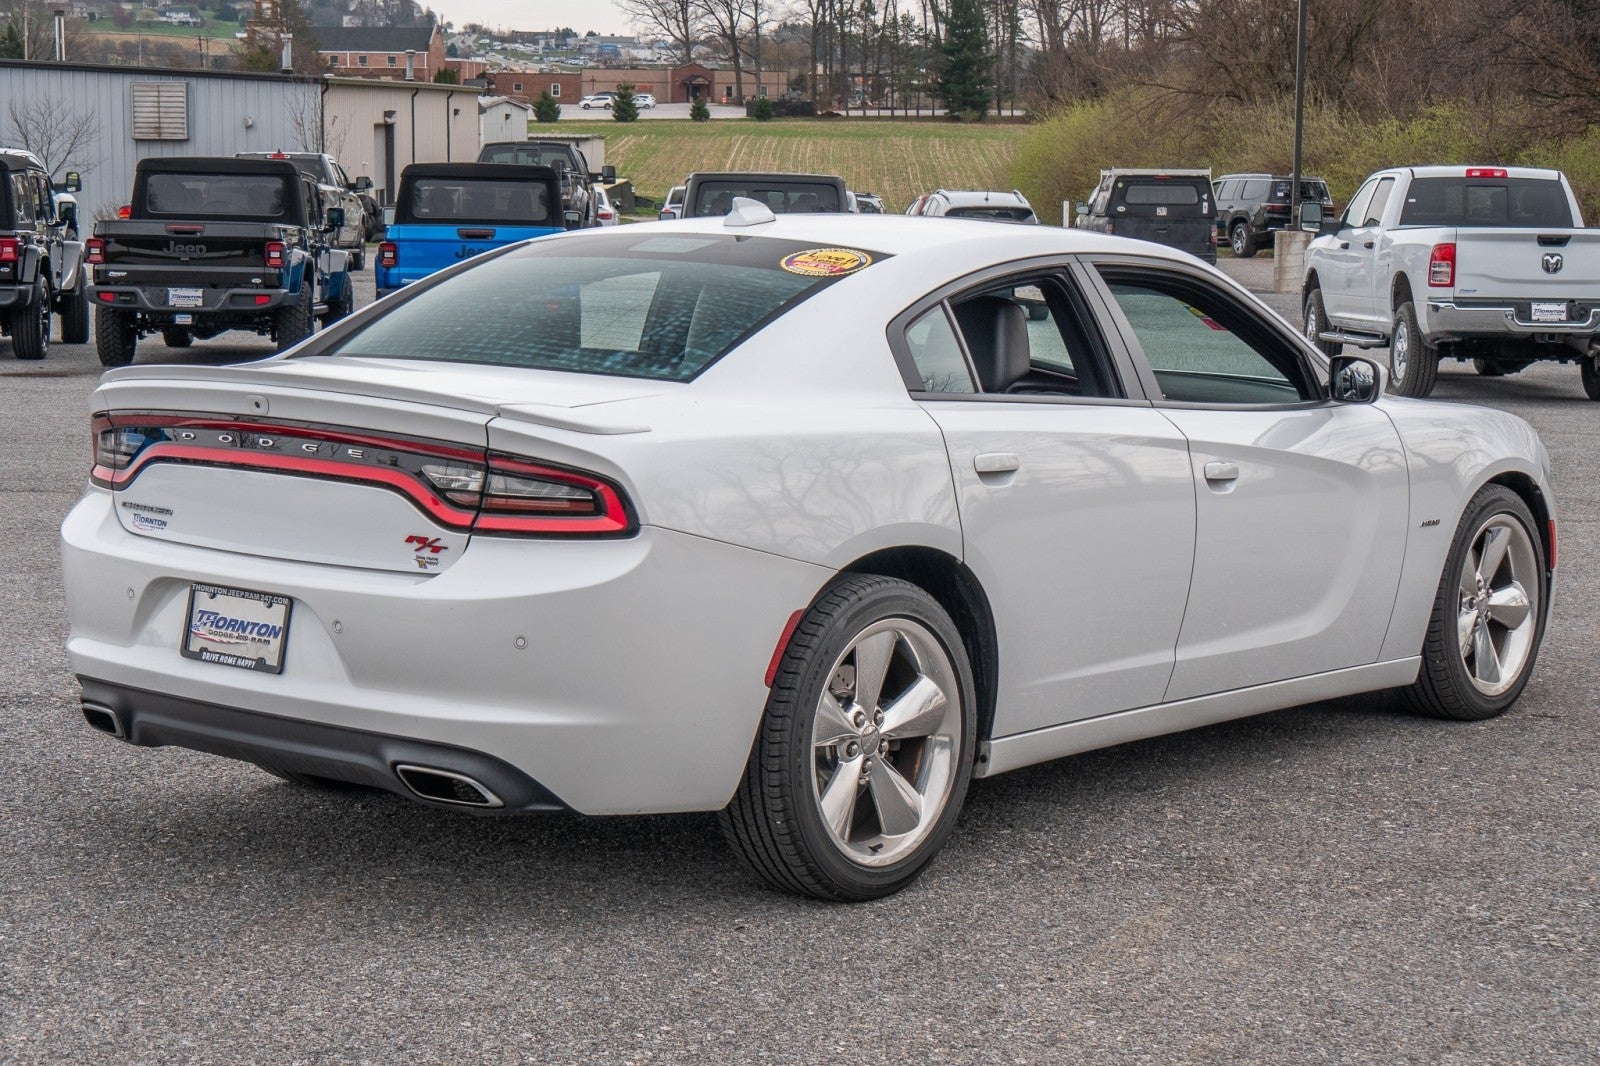 2015 Dodge Charger Road/Track